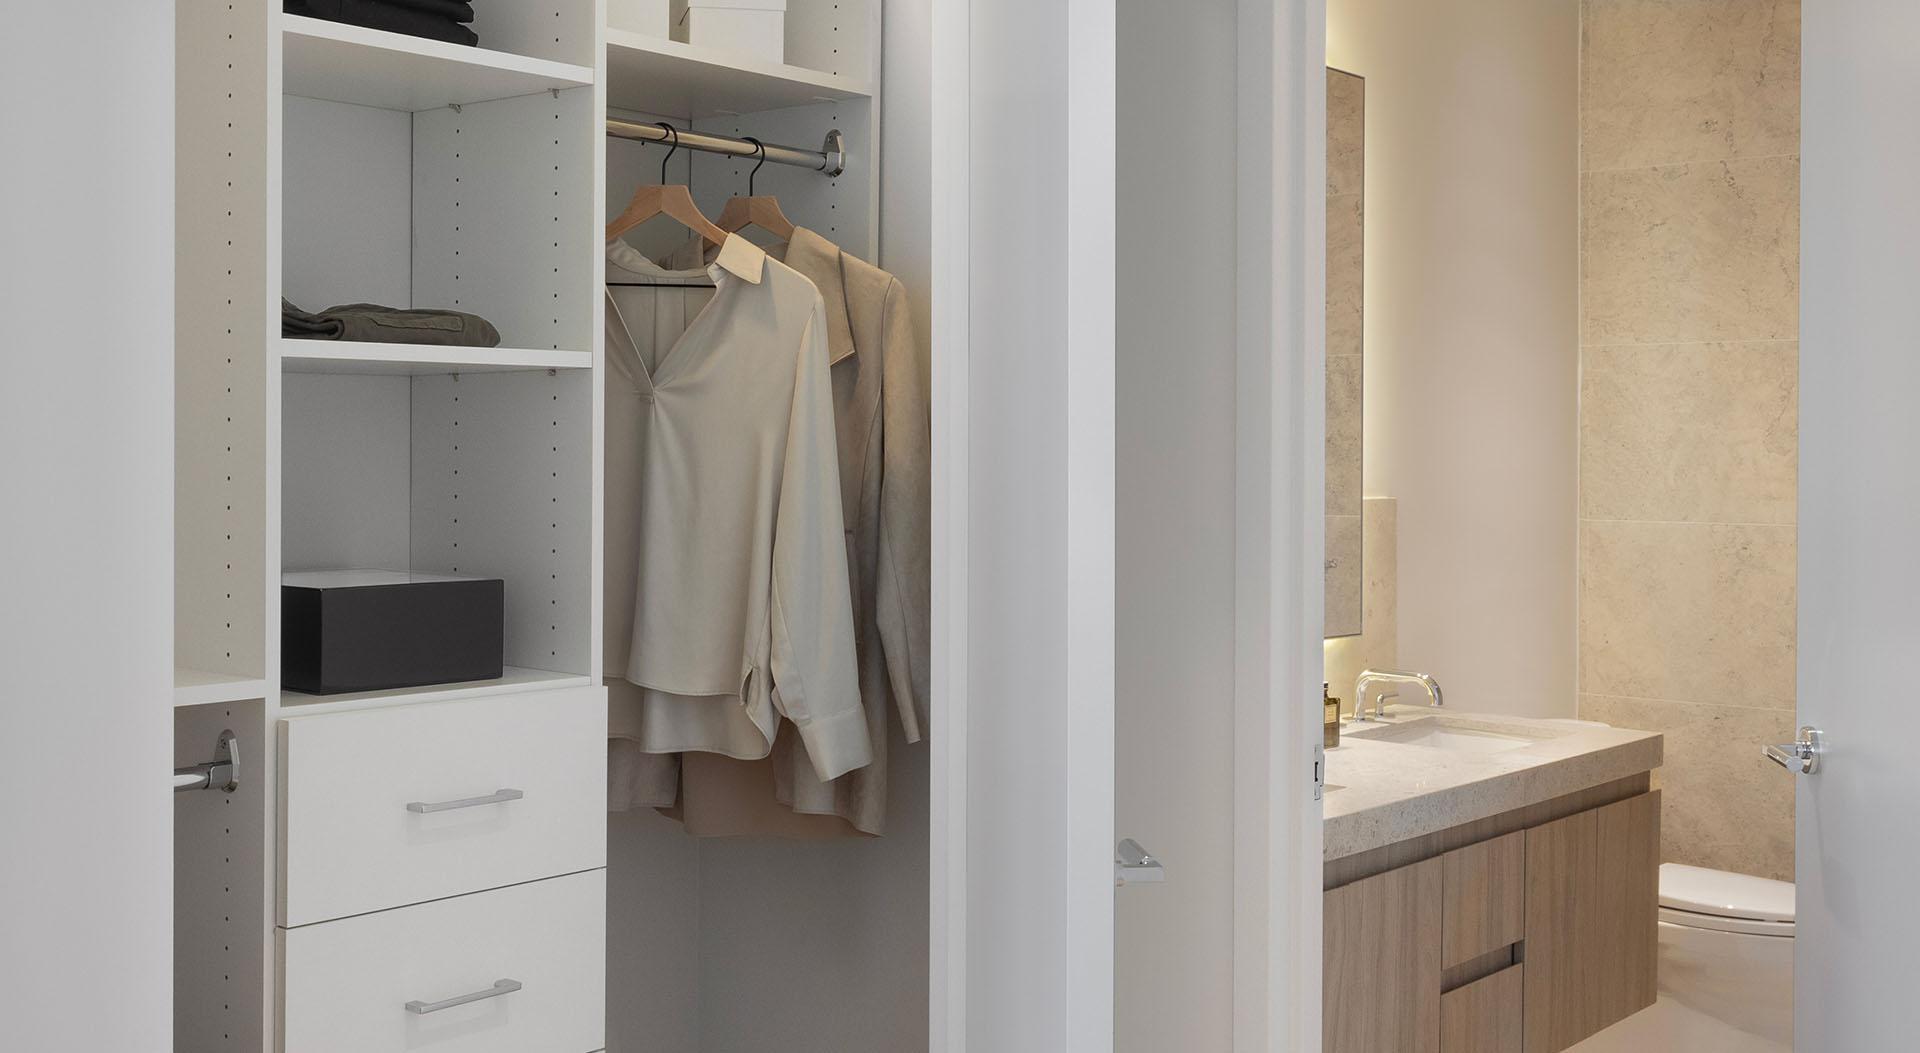 BUILT-IN HANGING AND STORAGE